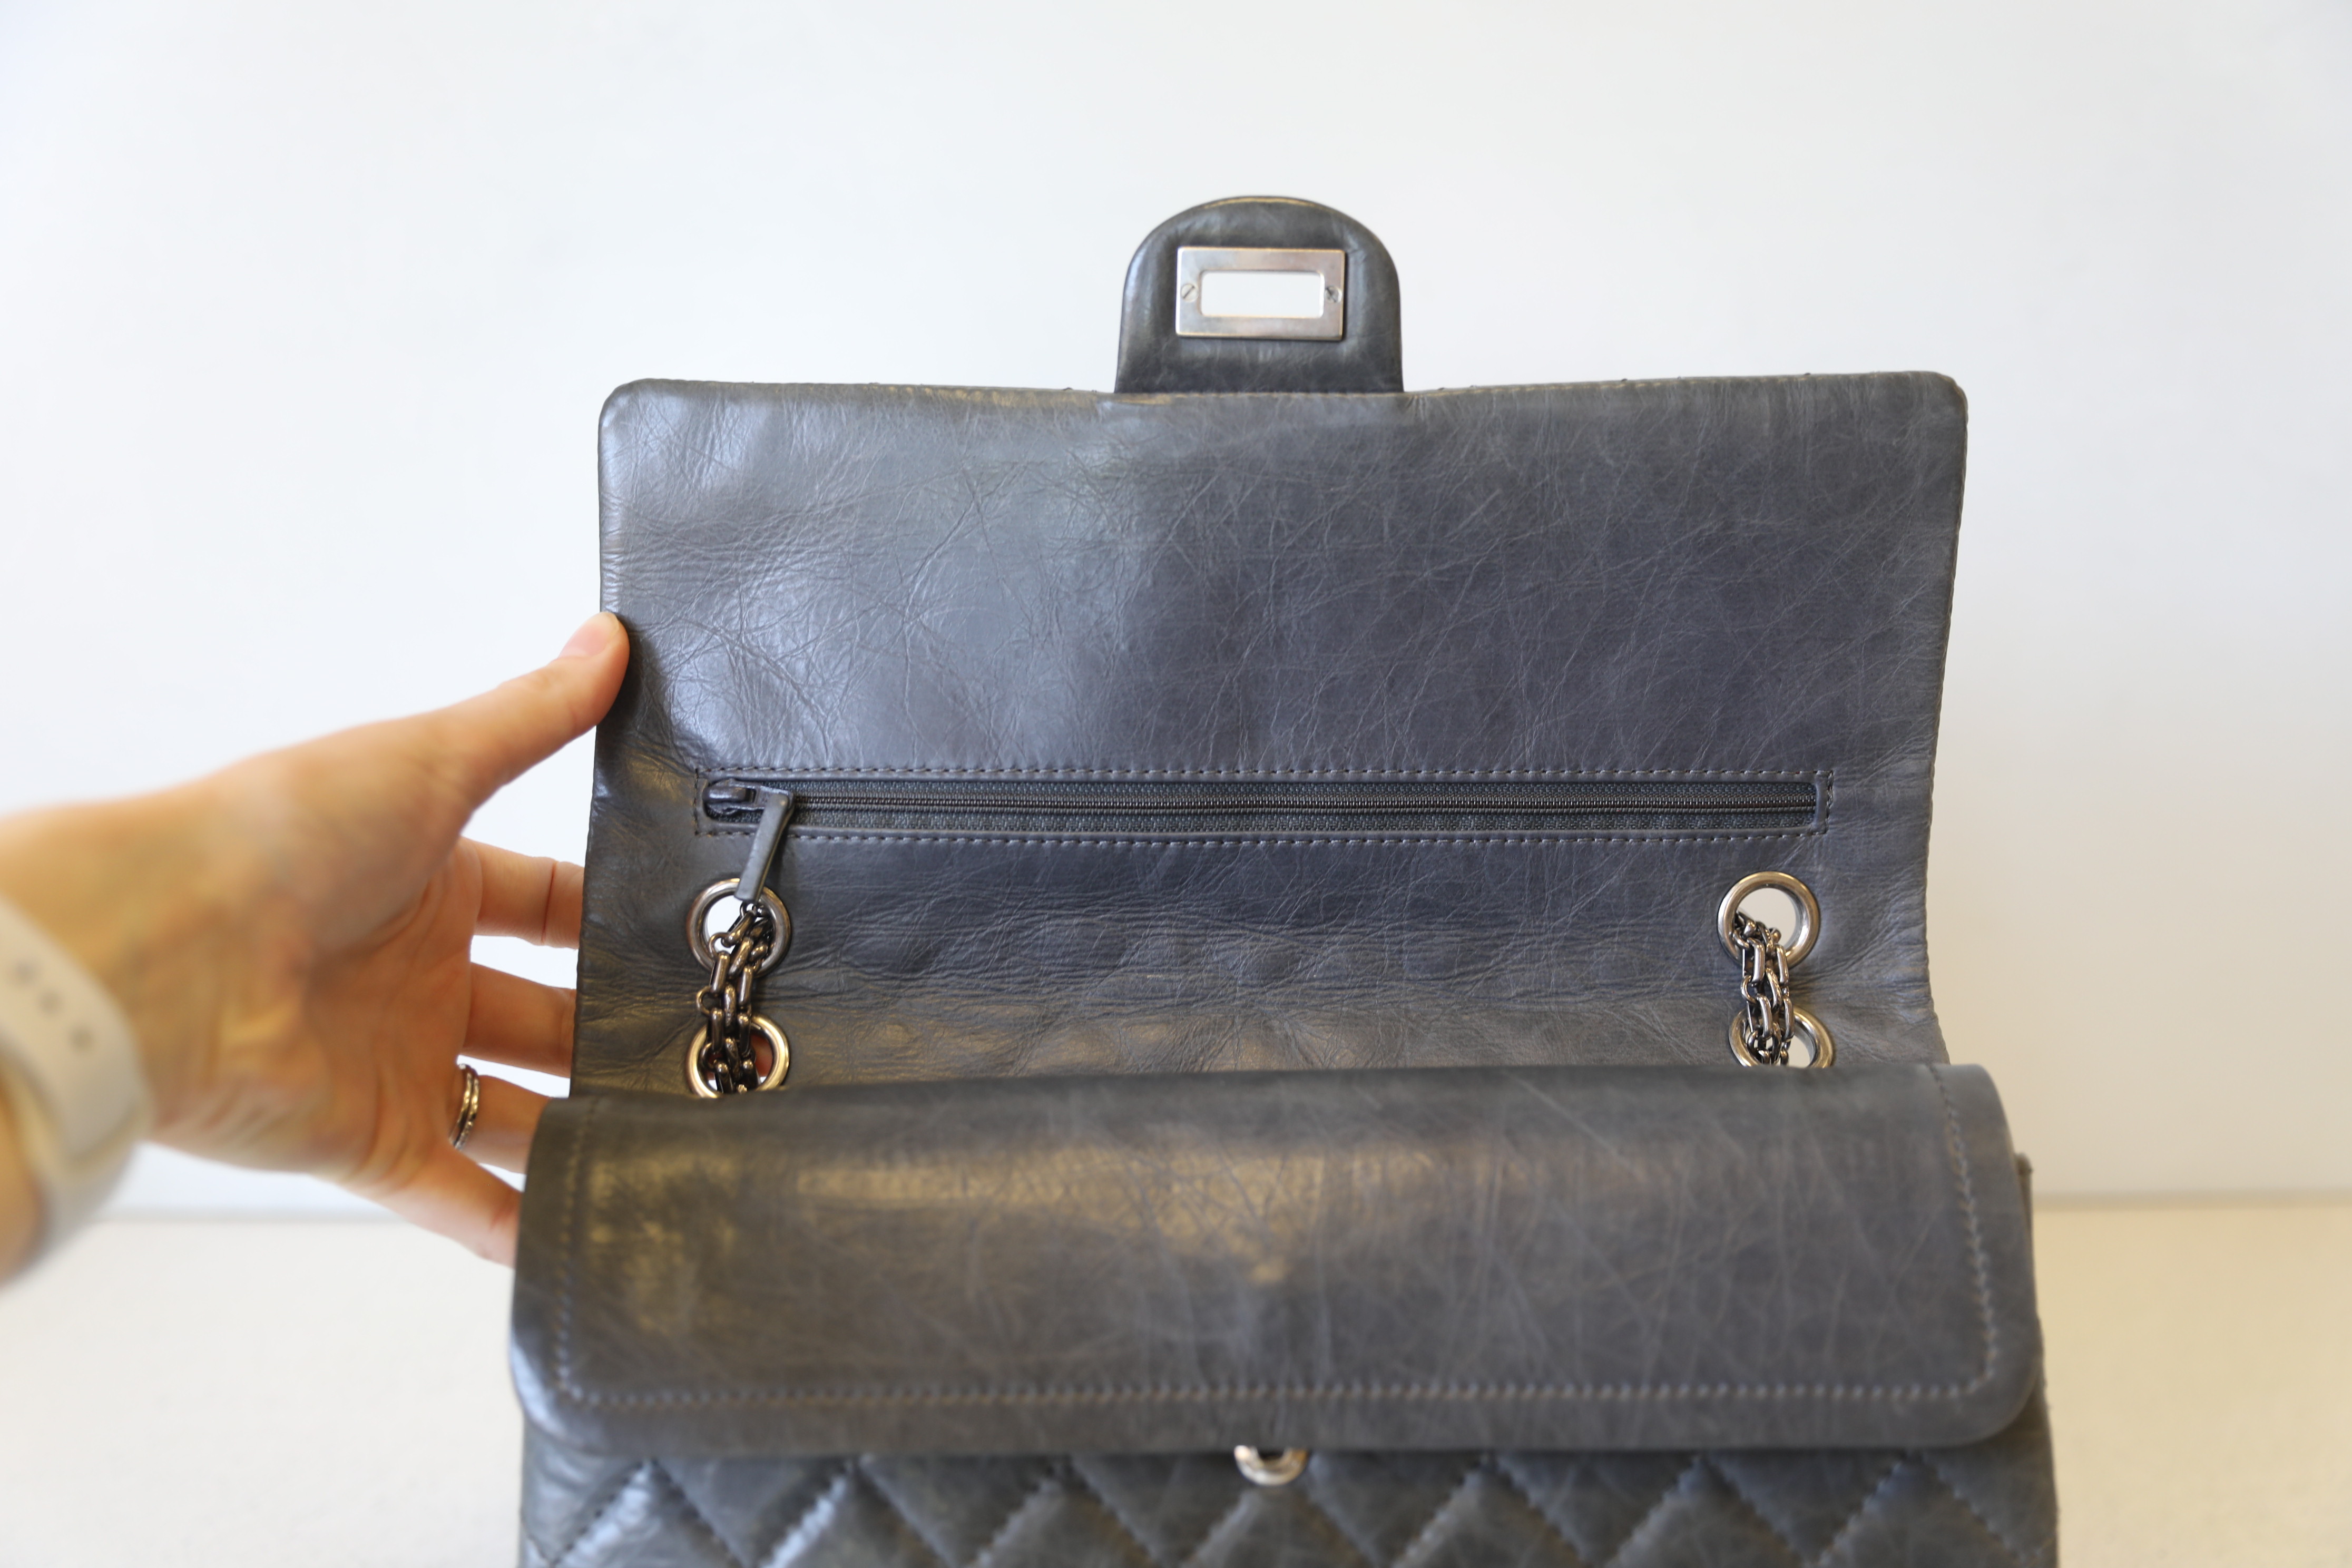 Chanel Reissue 2.55 226 Flap Bag, Grey Calfskin with Ruthenium Hardware,  Preowned in Box WA001